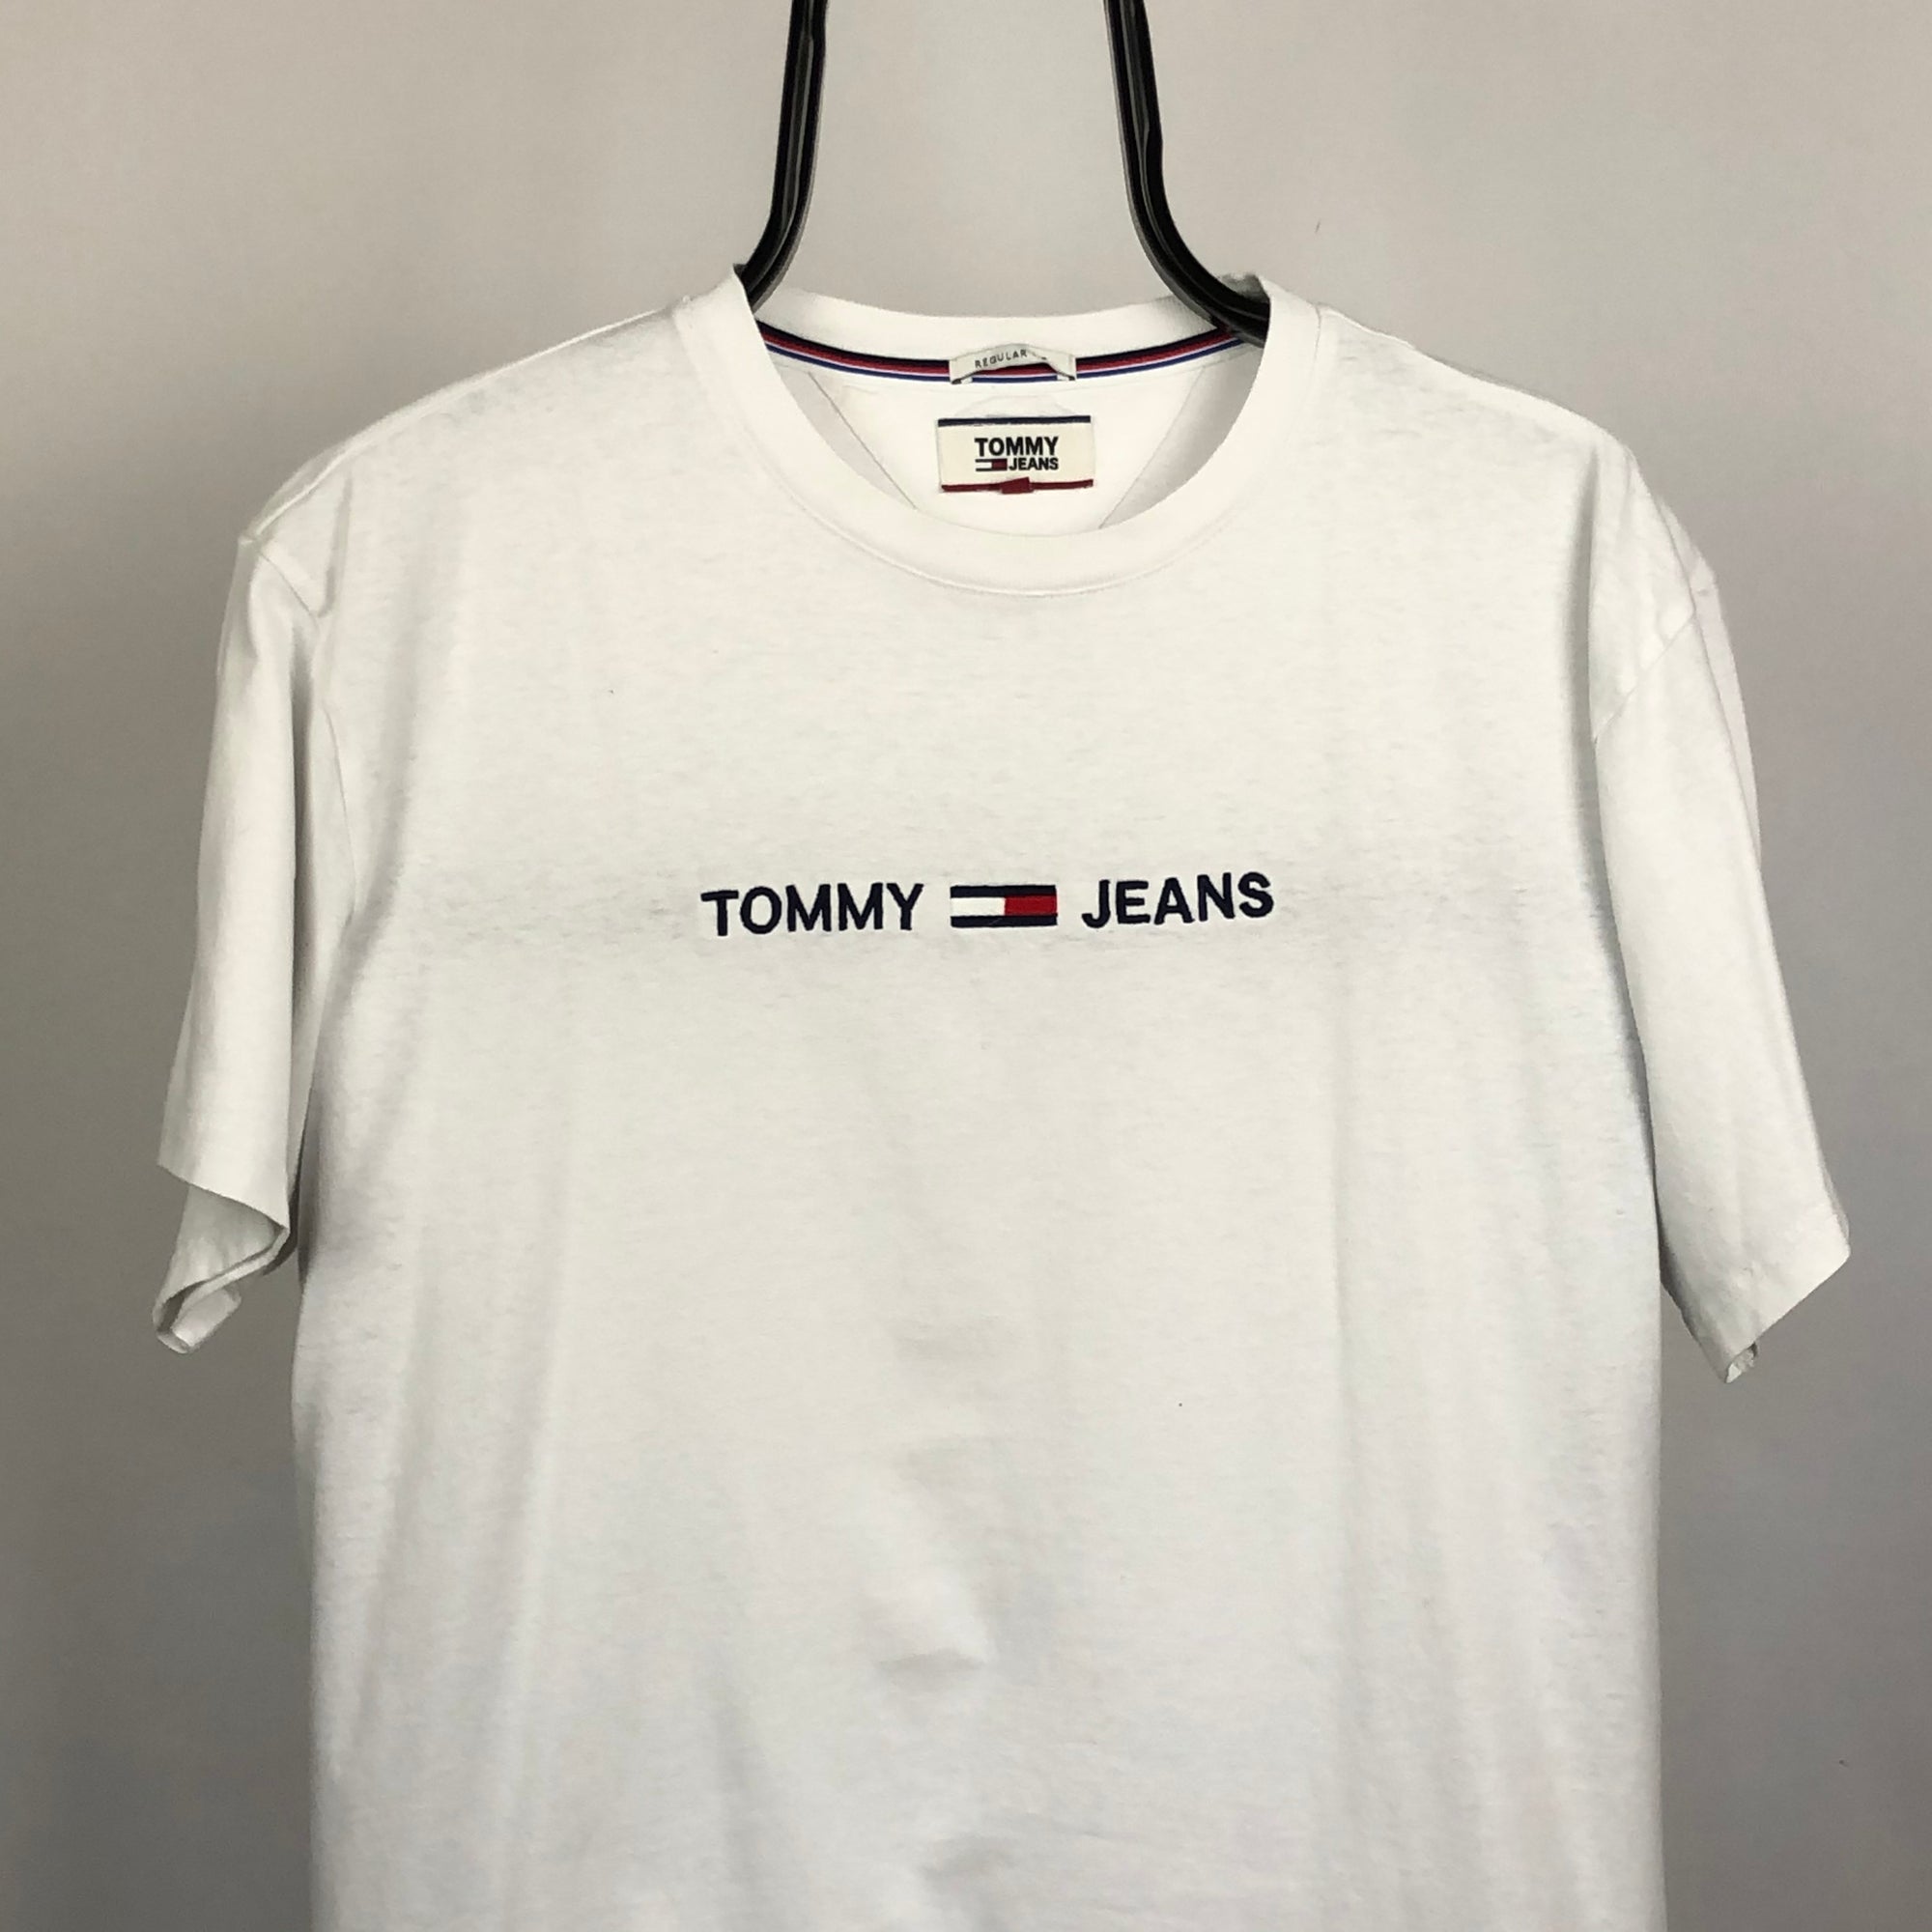 Tommy Jeans Embroidered Spellout Tee in White - Men's Small/Women's Medium